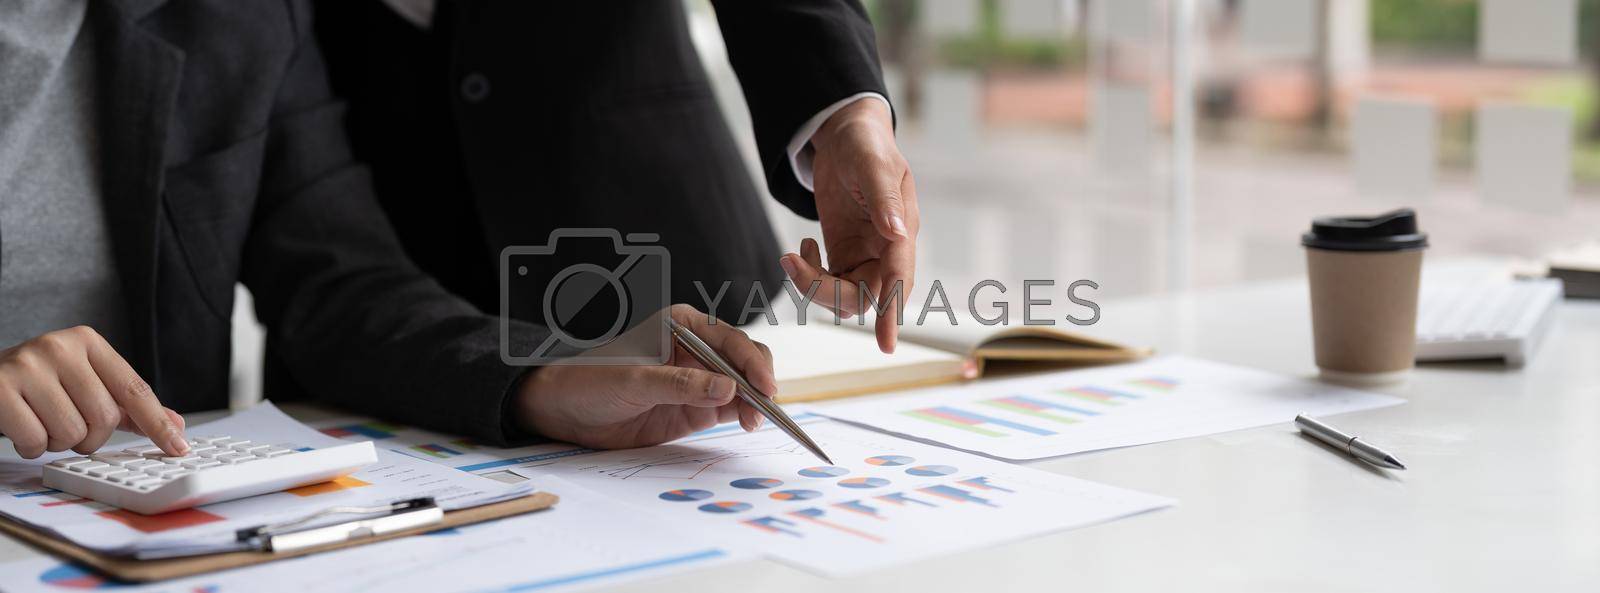 Teamwork process, Business adviser analyzing financial figures denoting the progress in the work of the company.